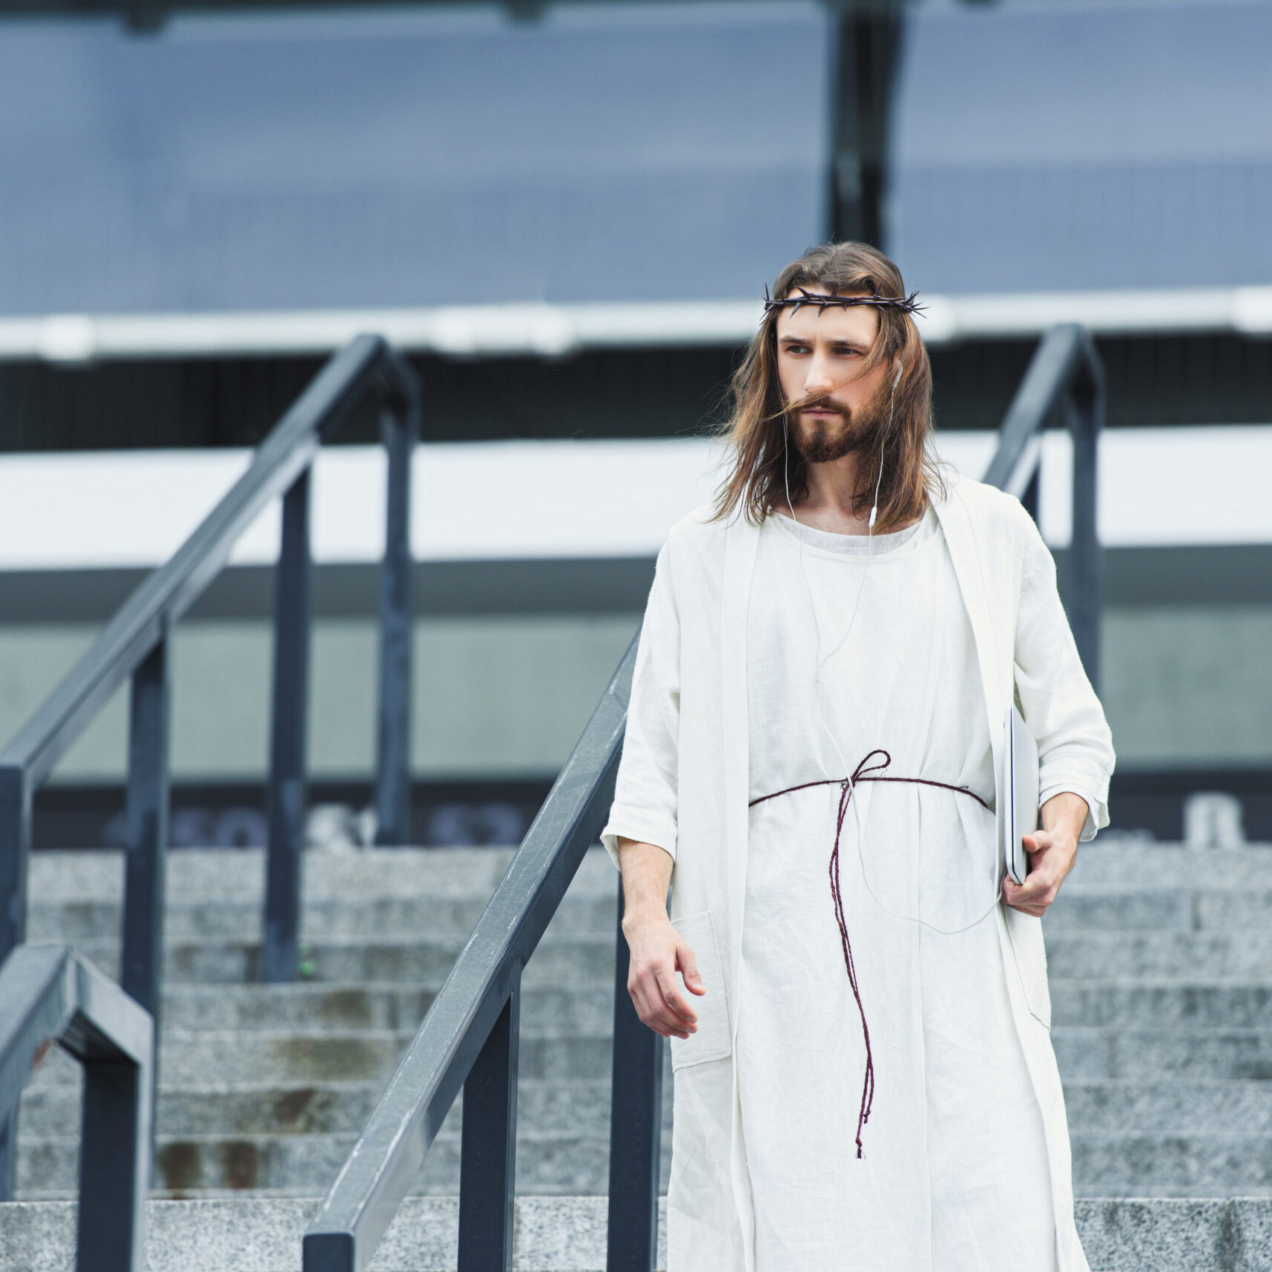 3 Reasons Why You Don’t Feel Christian Enough